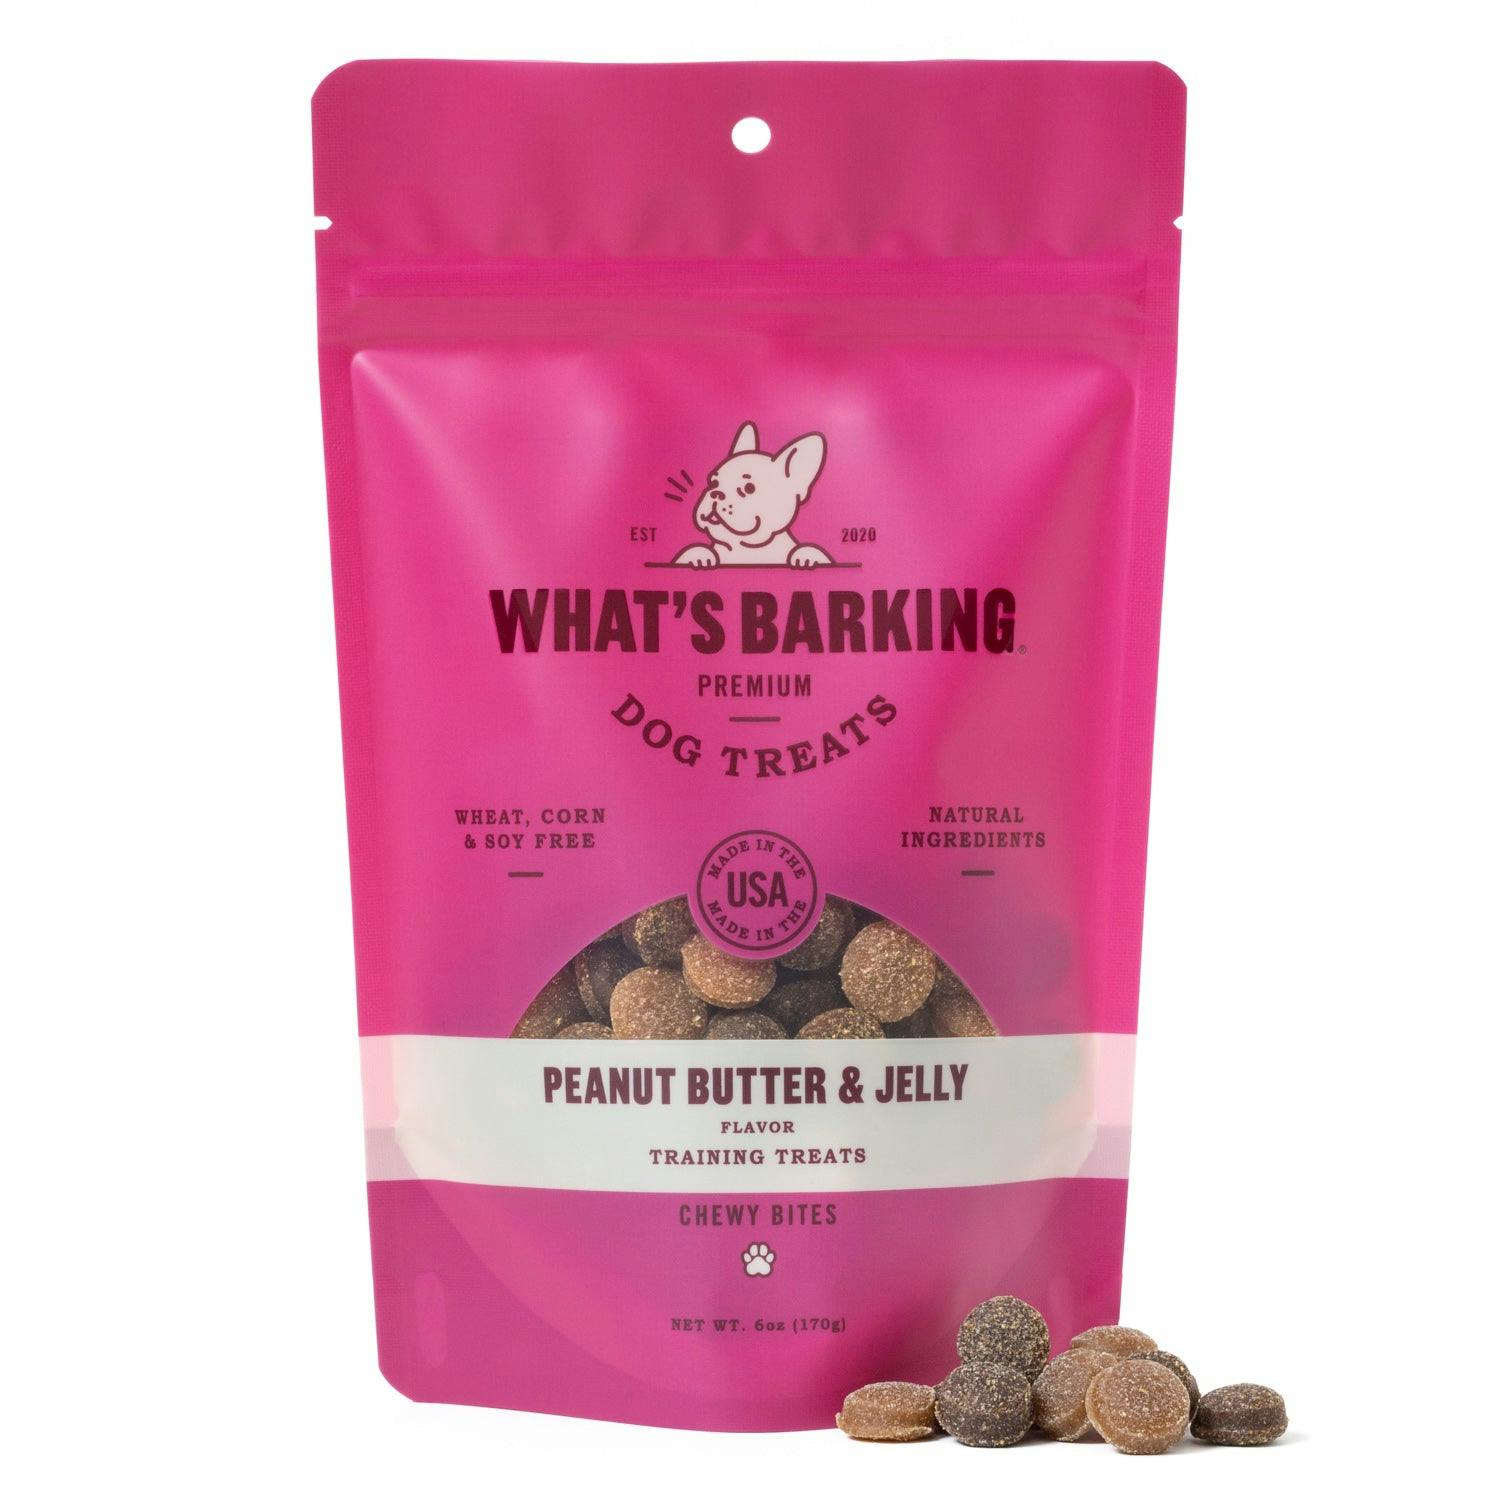 What's Barking Peanut Butter & Jelly Chewy Training Treats